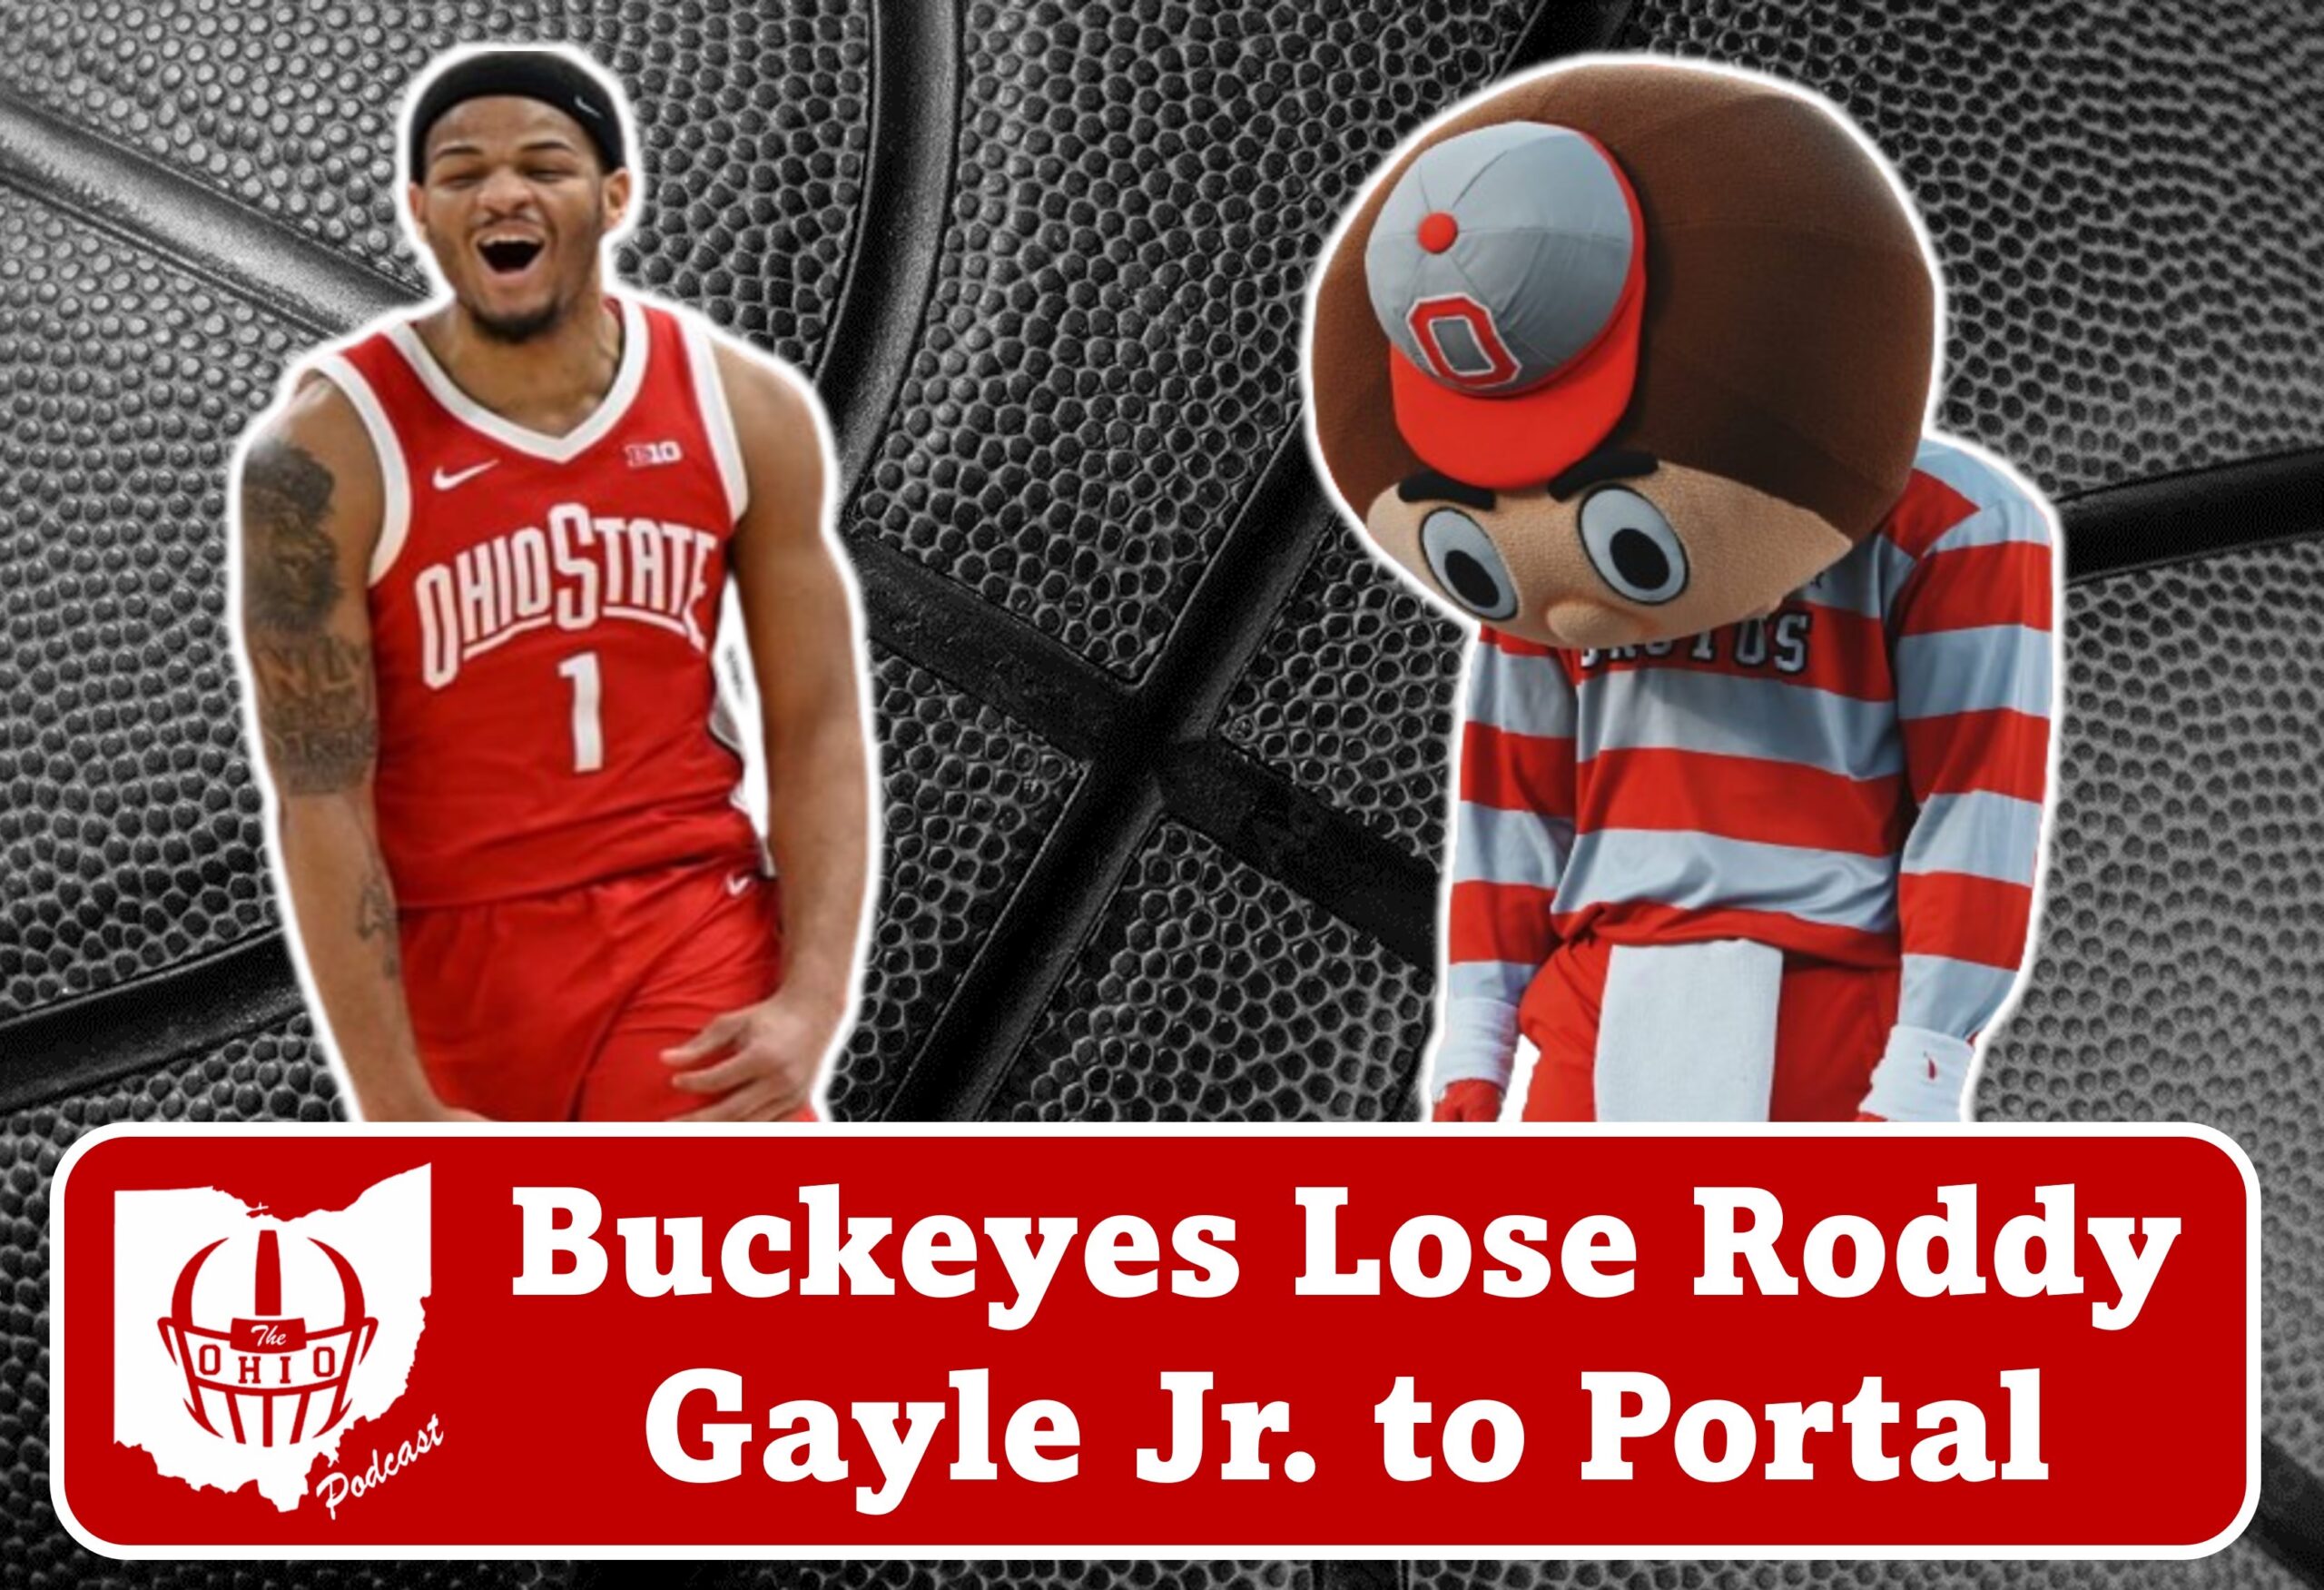 Ohio State Basketball Loses Roddy Gayle Jr. to the Portal